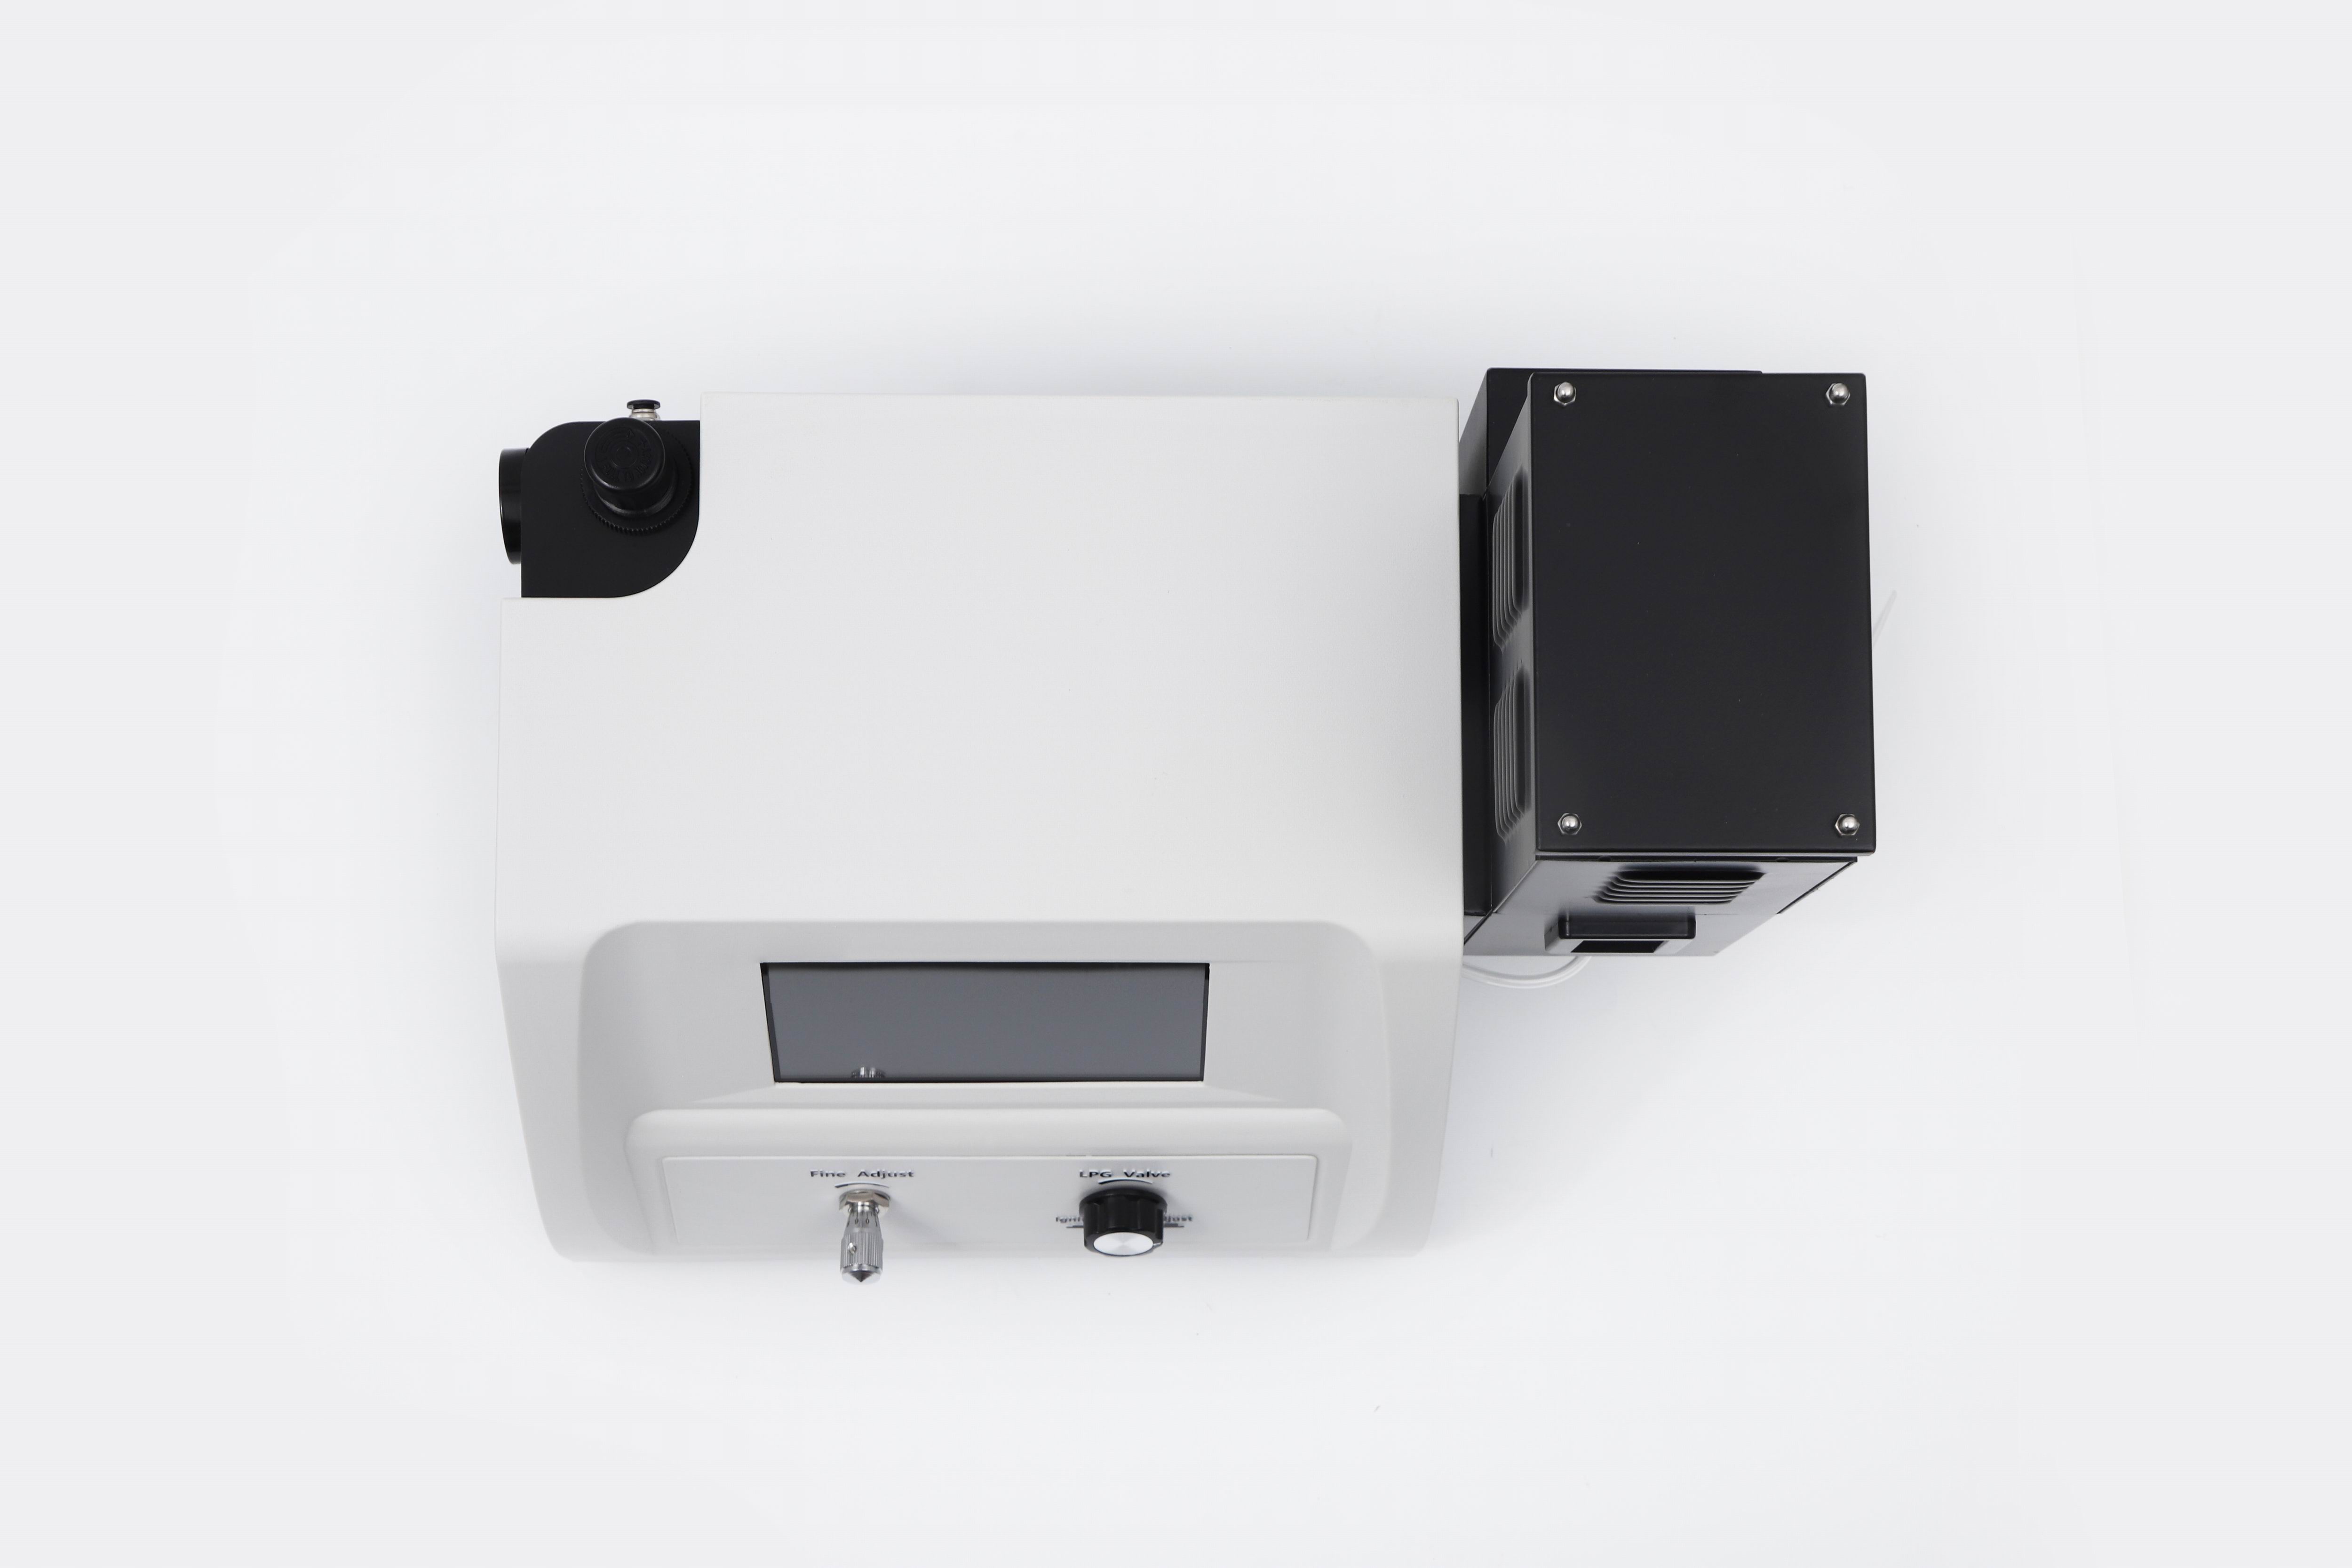  MS-5500 Flame Photometer